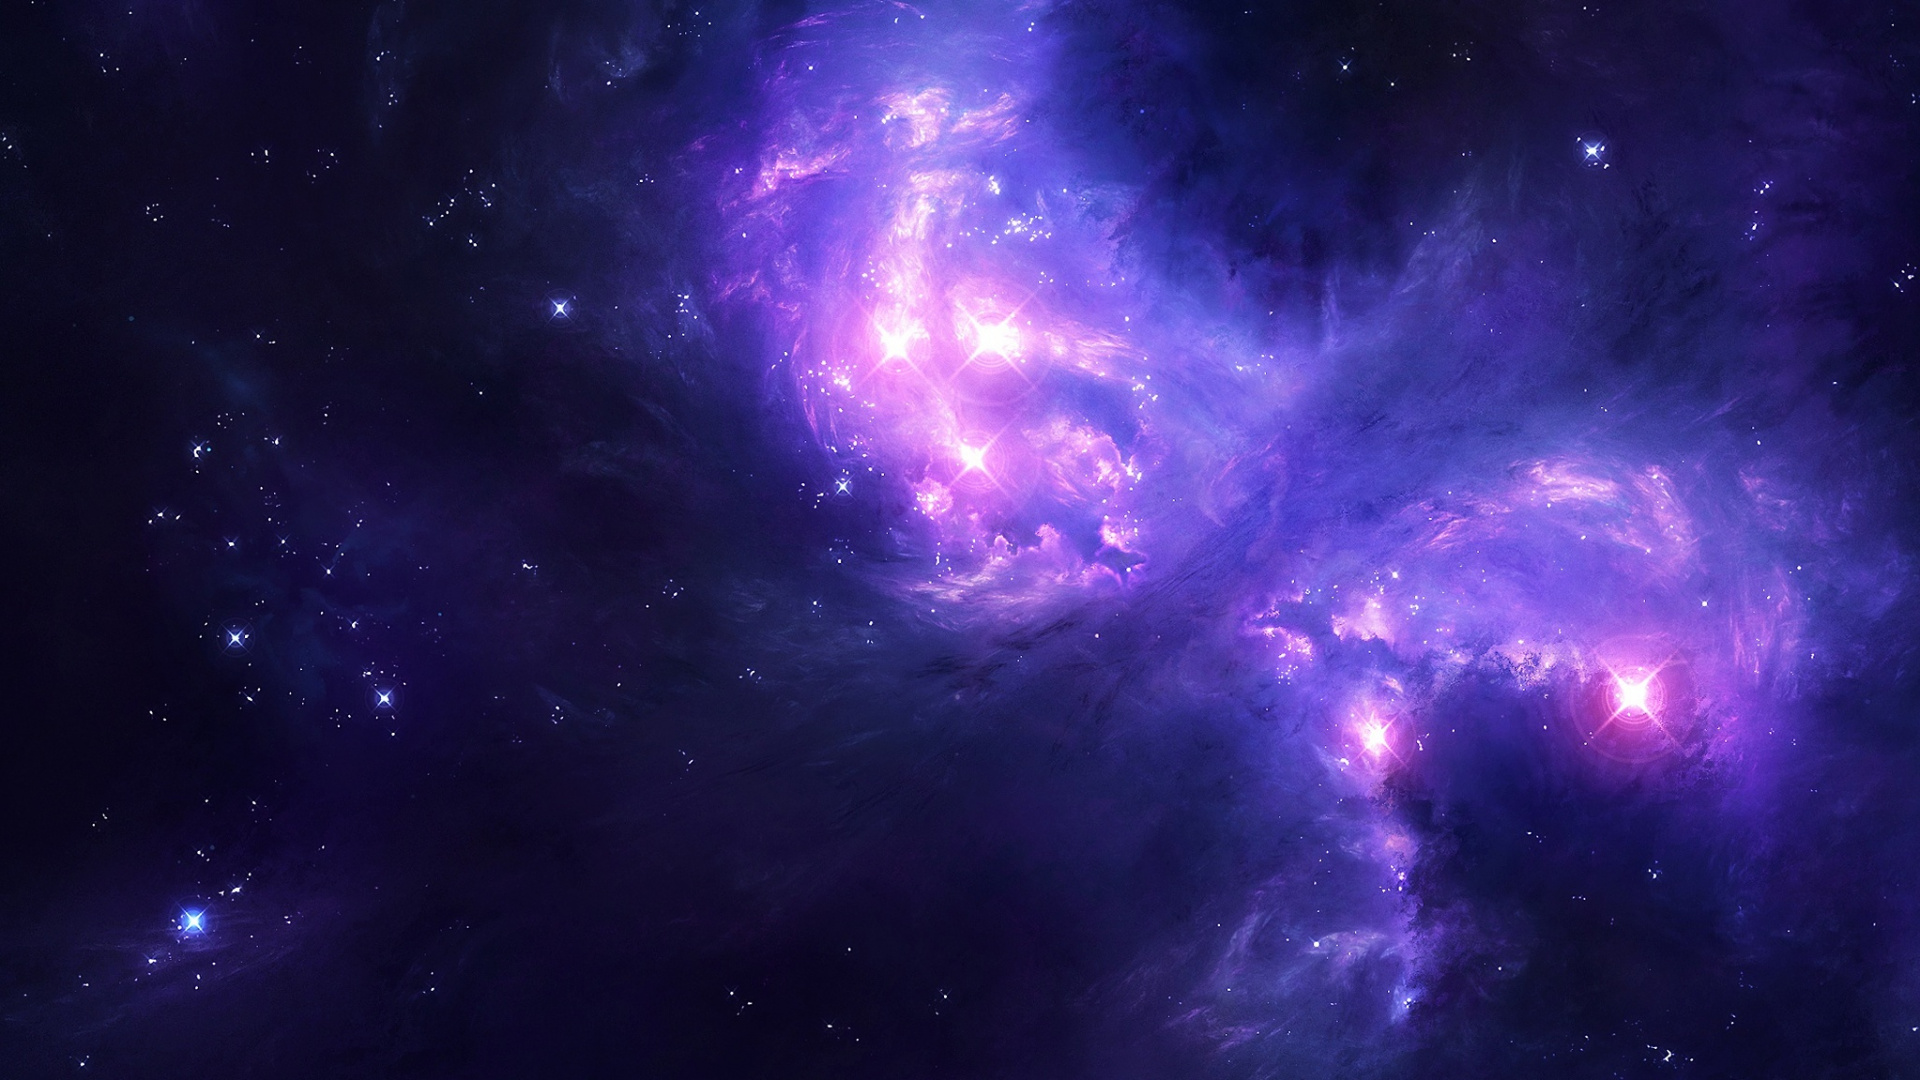 Purple and Blue Galaxy Illustration. Wallpaper in 1920x1080 Resolution